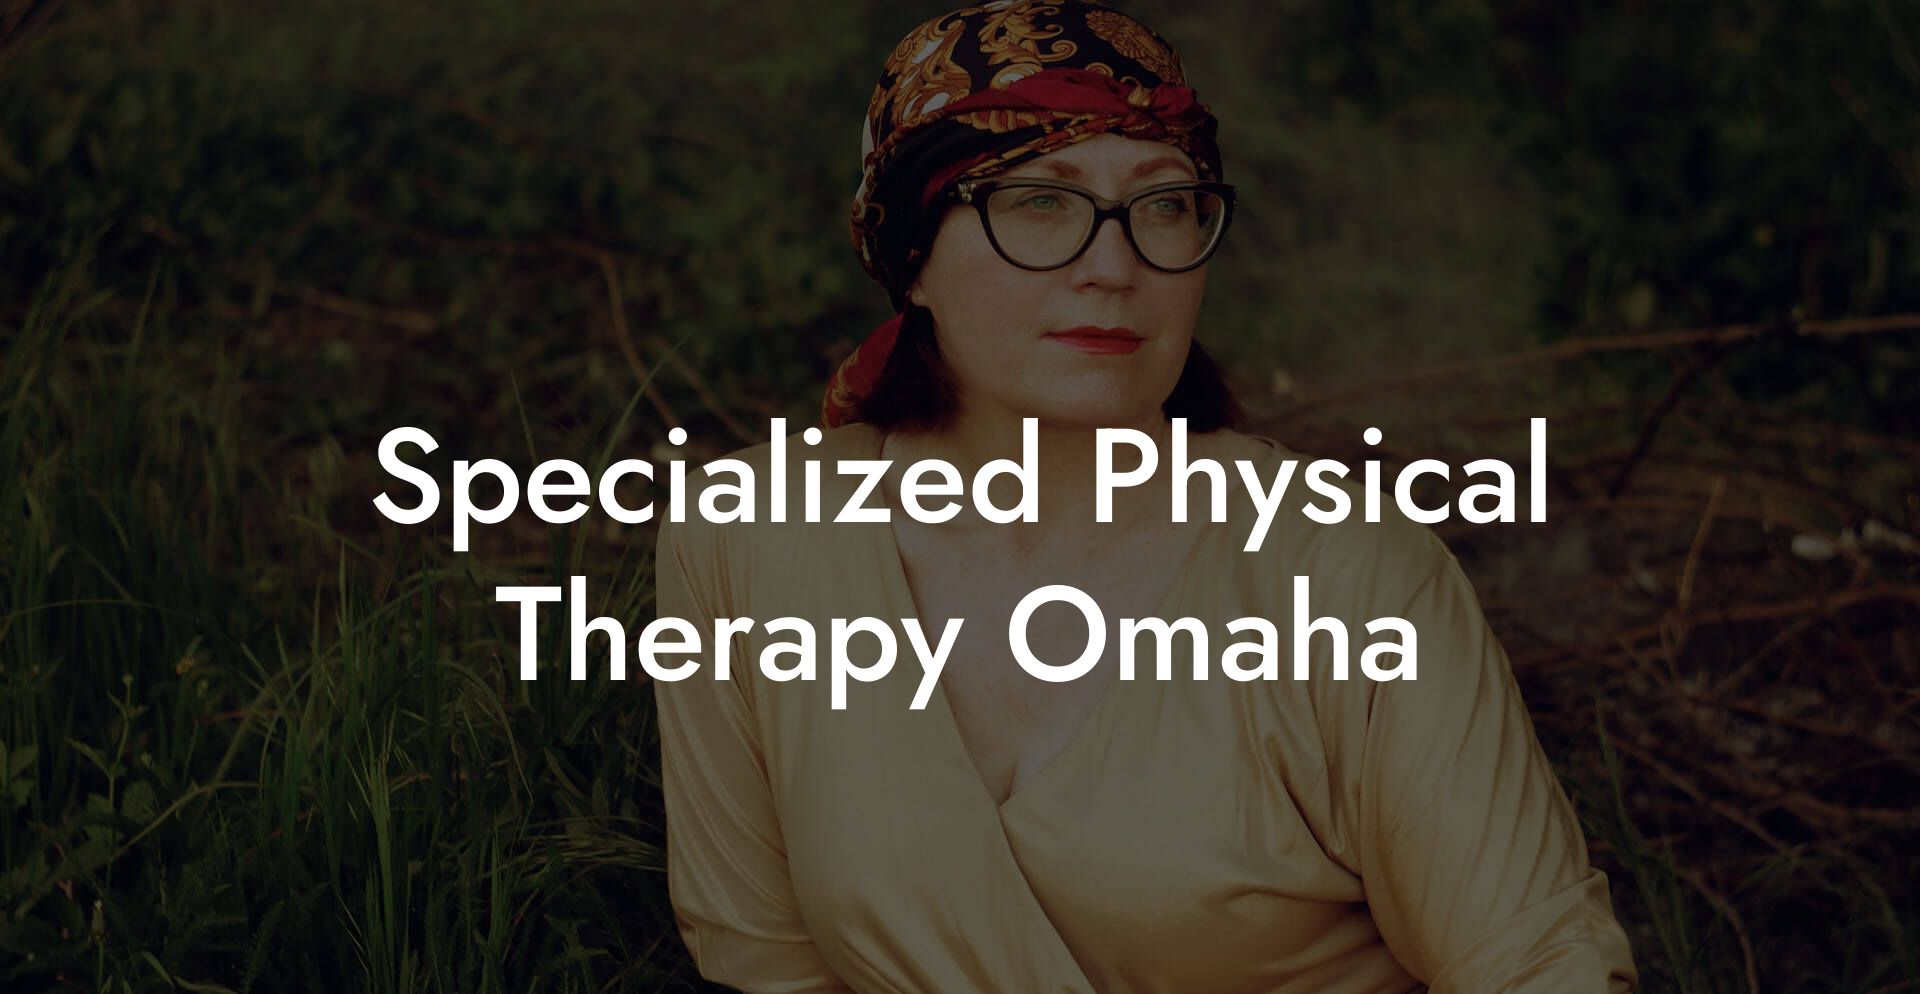 Specialized Physical Therapy Omaha